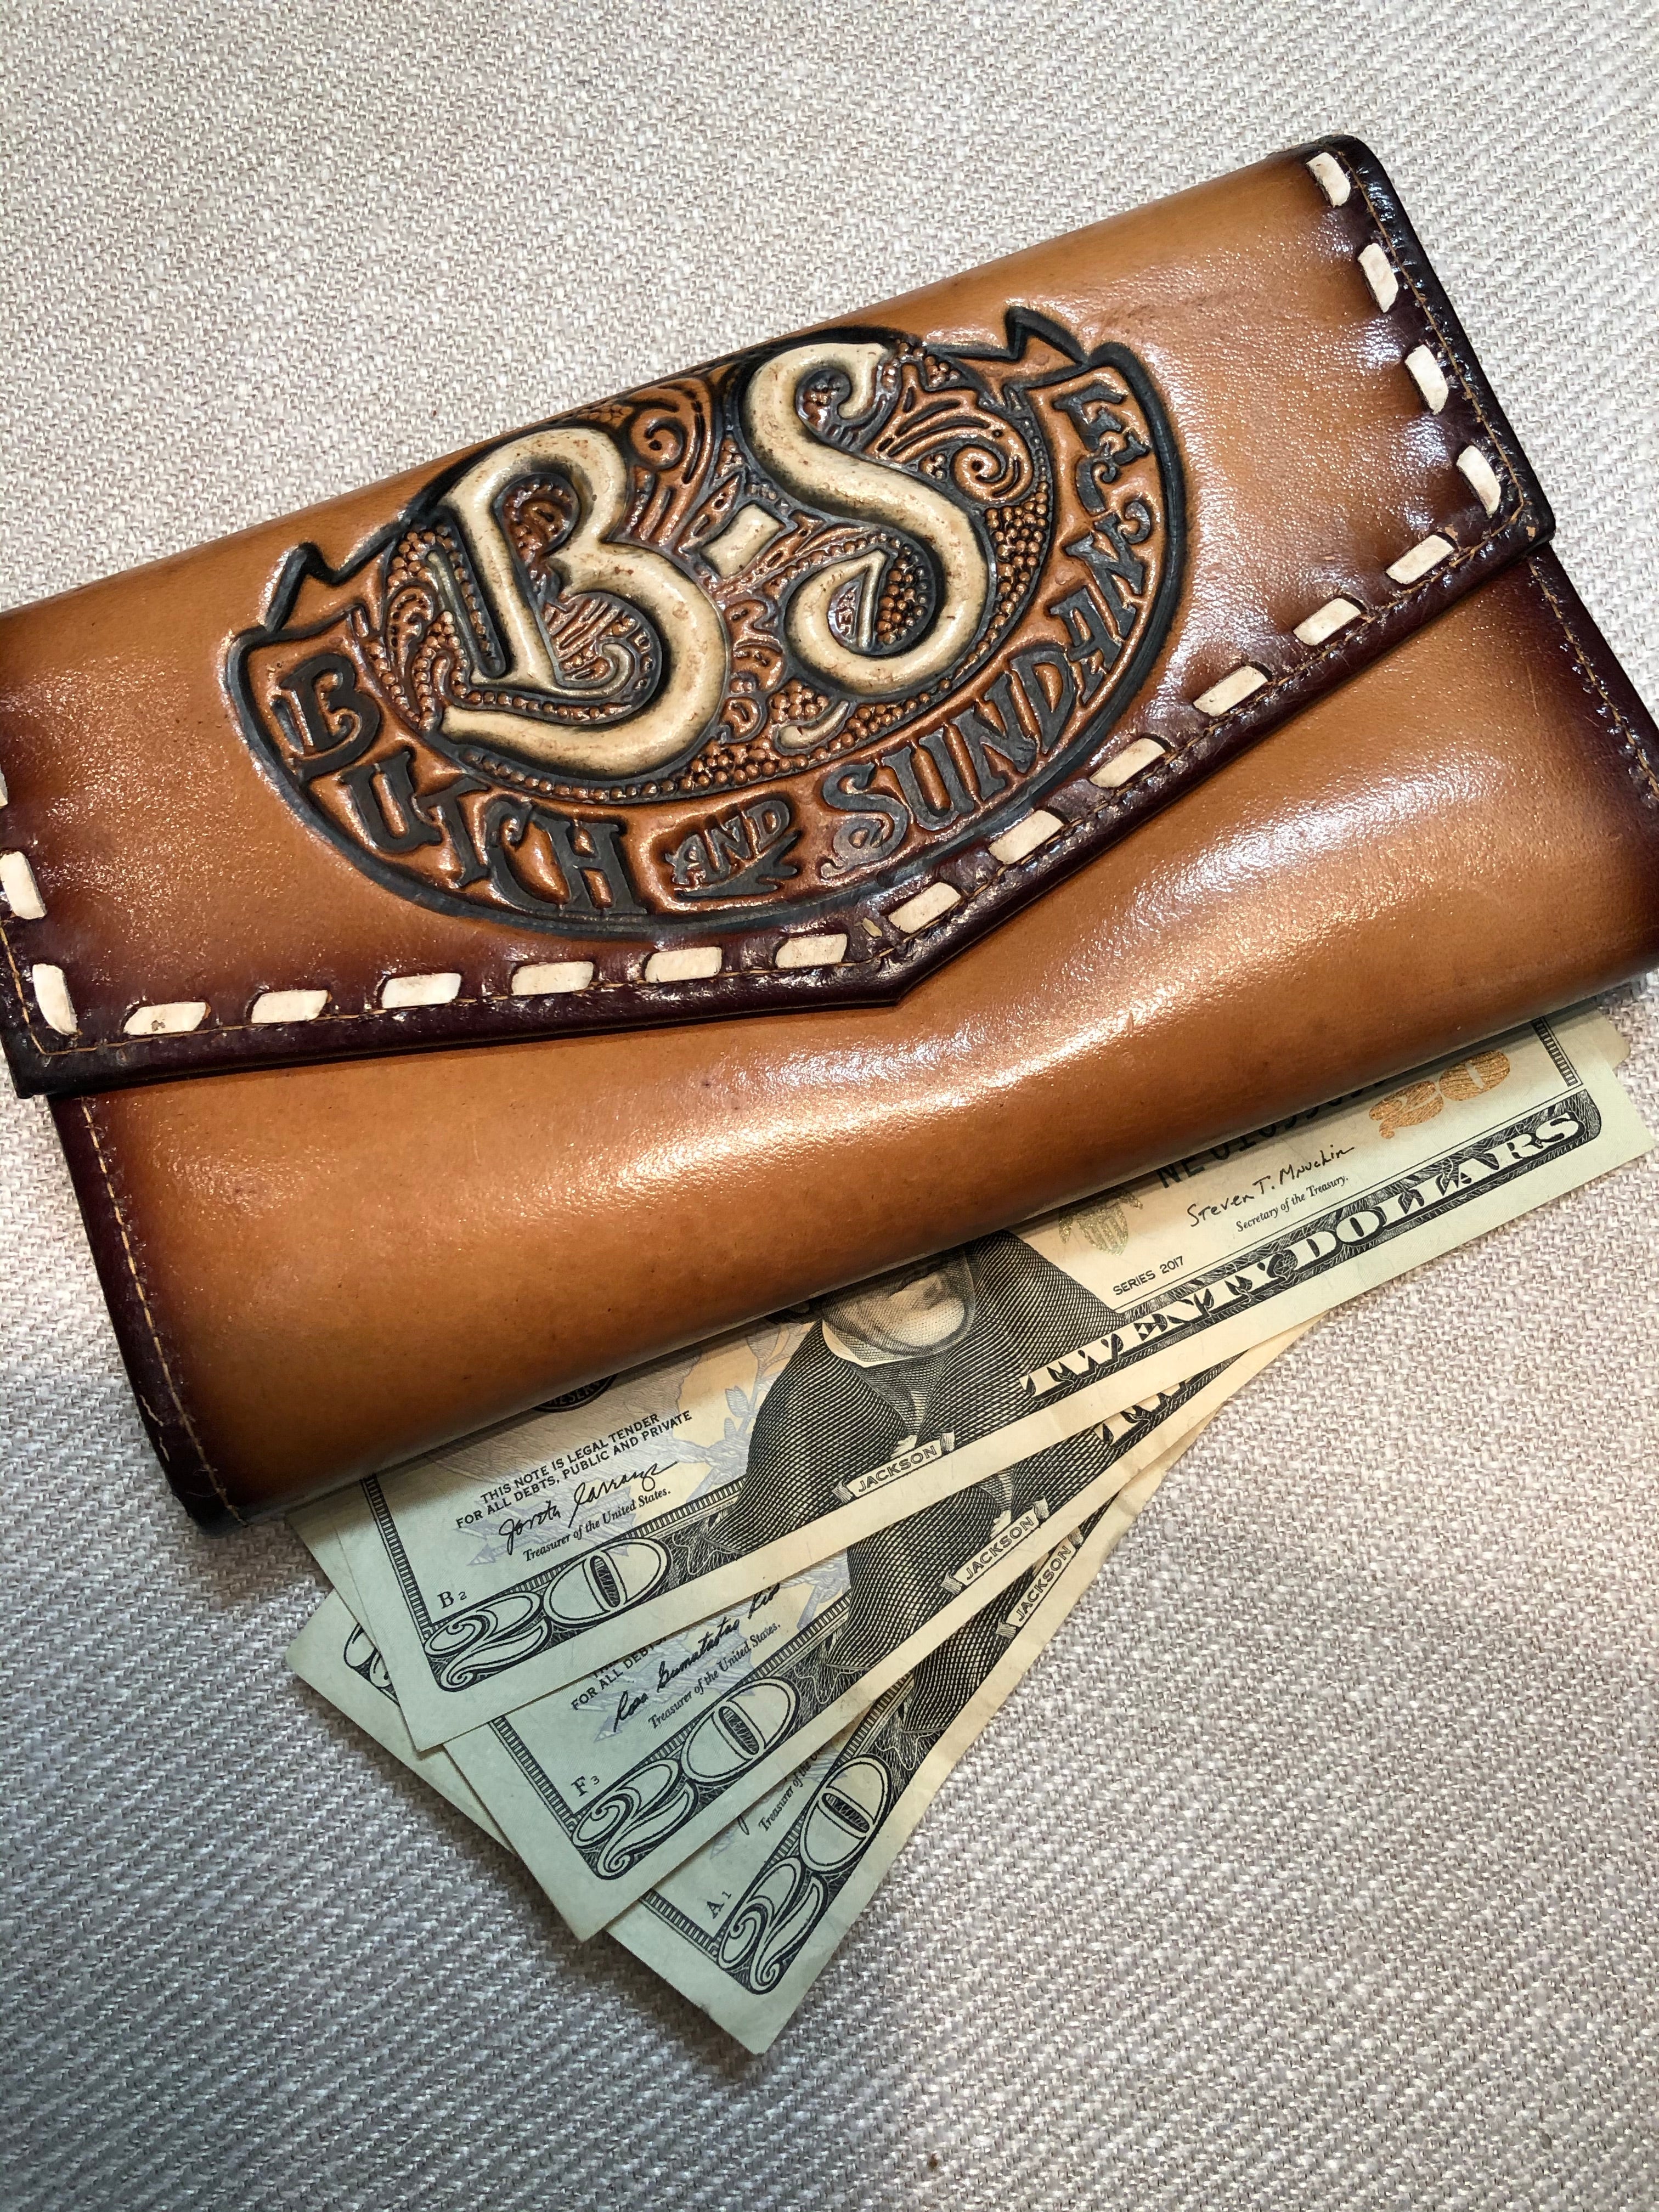 Butch Cassidy and Sundance Vintage Wallet